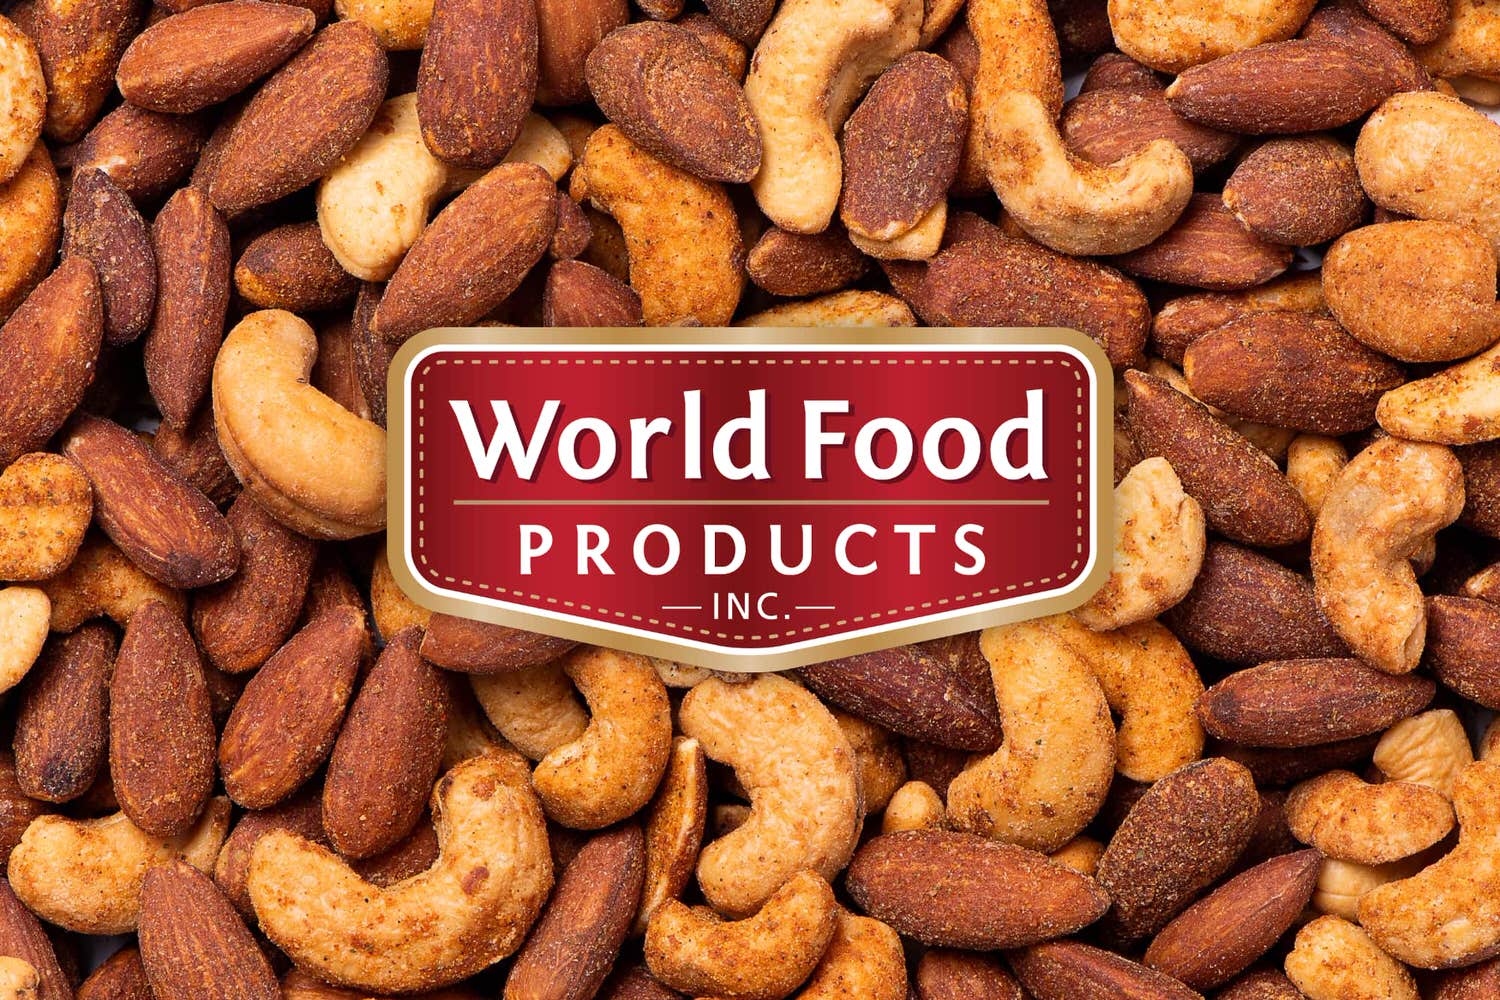 World Food Products